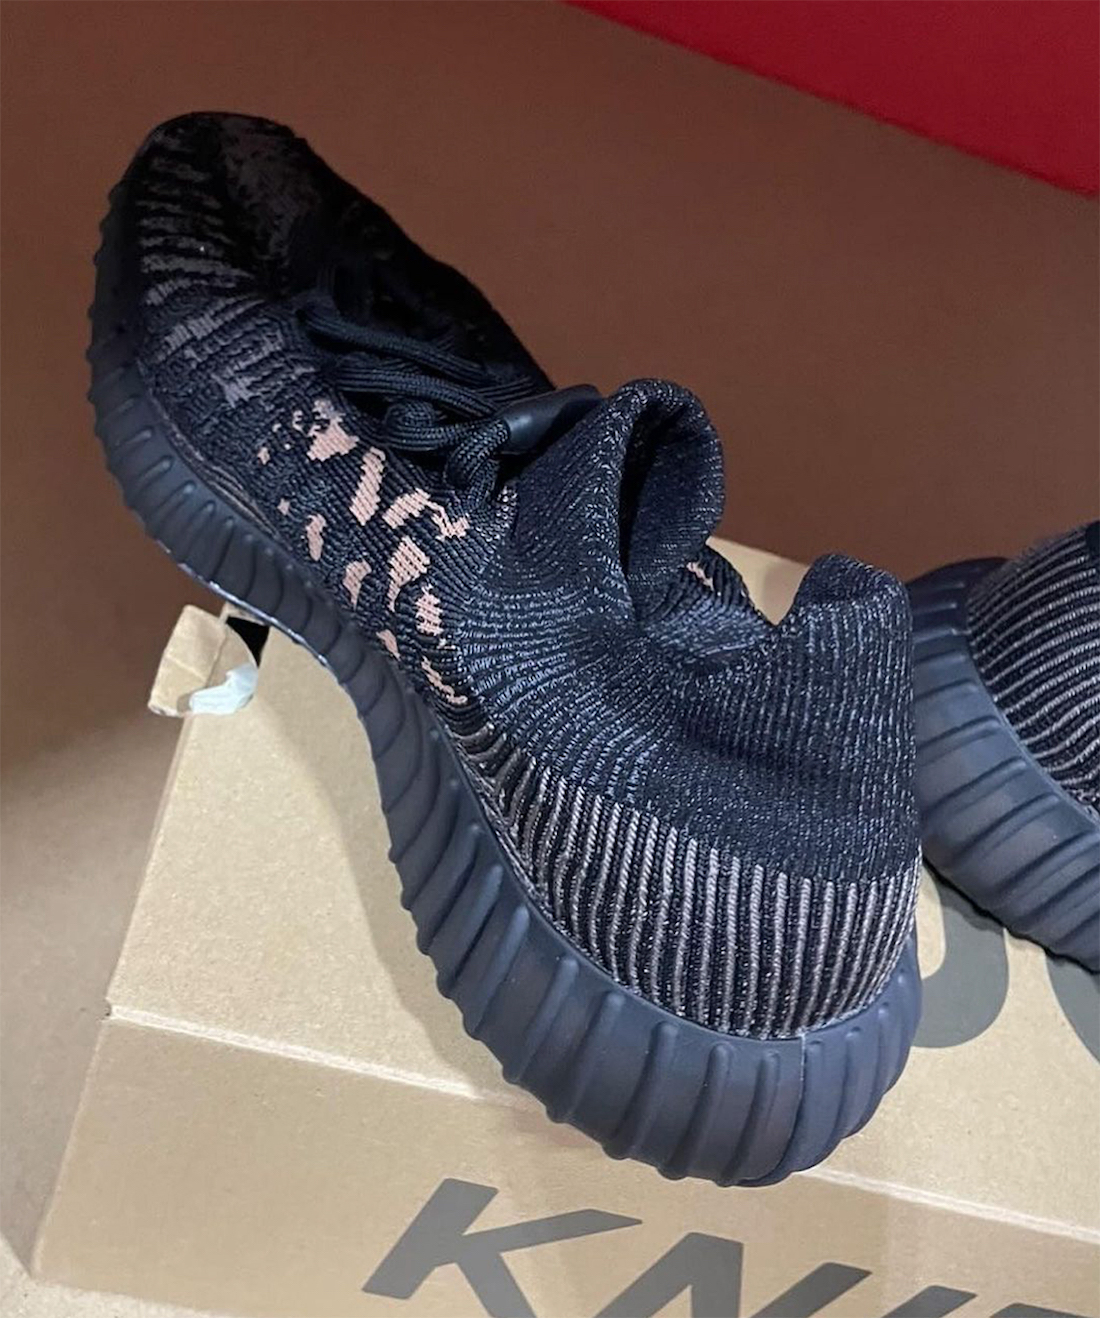 adidas Yeezy Boost 350 V2 CMPCT Slate Carbon HQ6319 Release Date